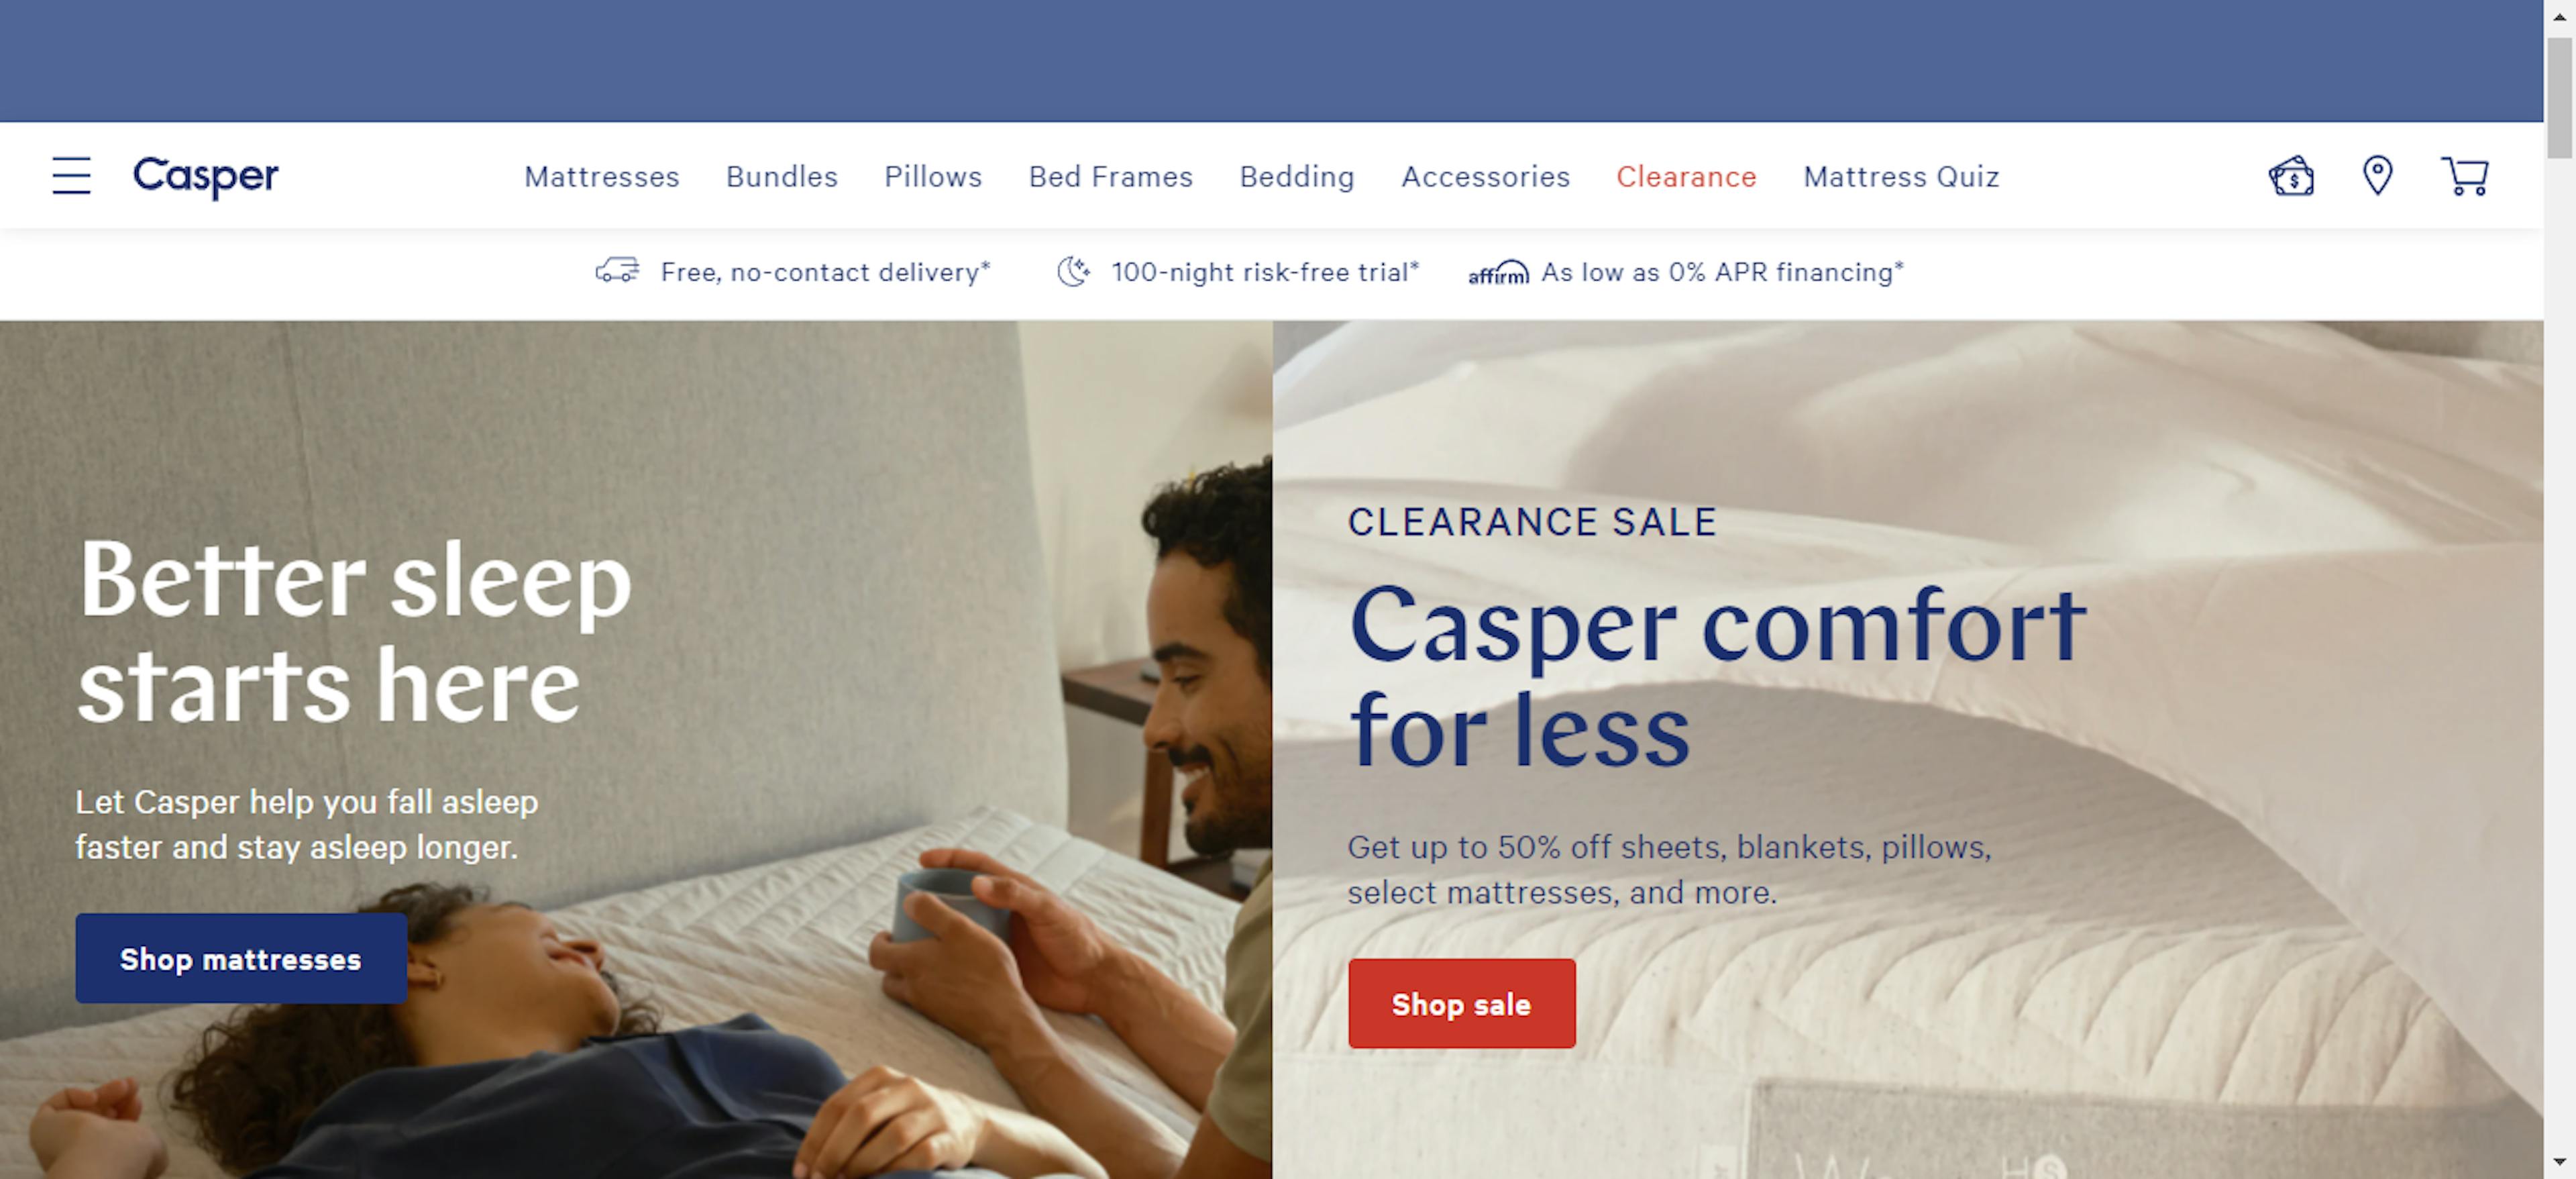 Casper is one of the most successful direct-to-consumer brands